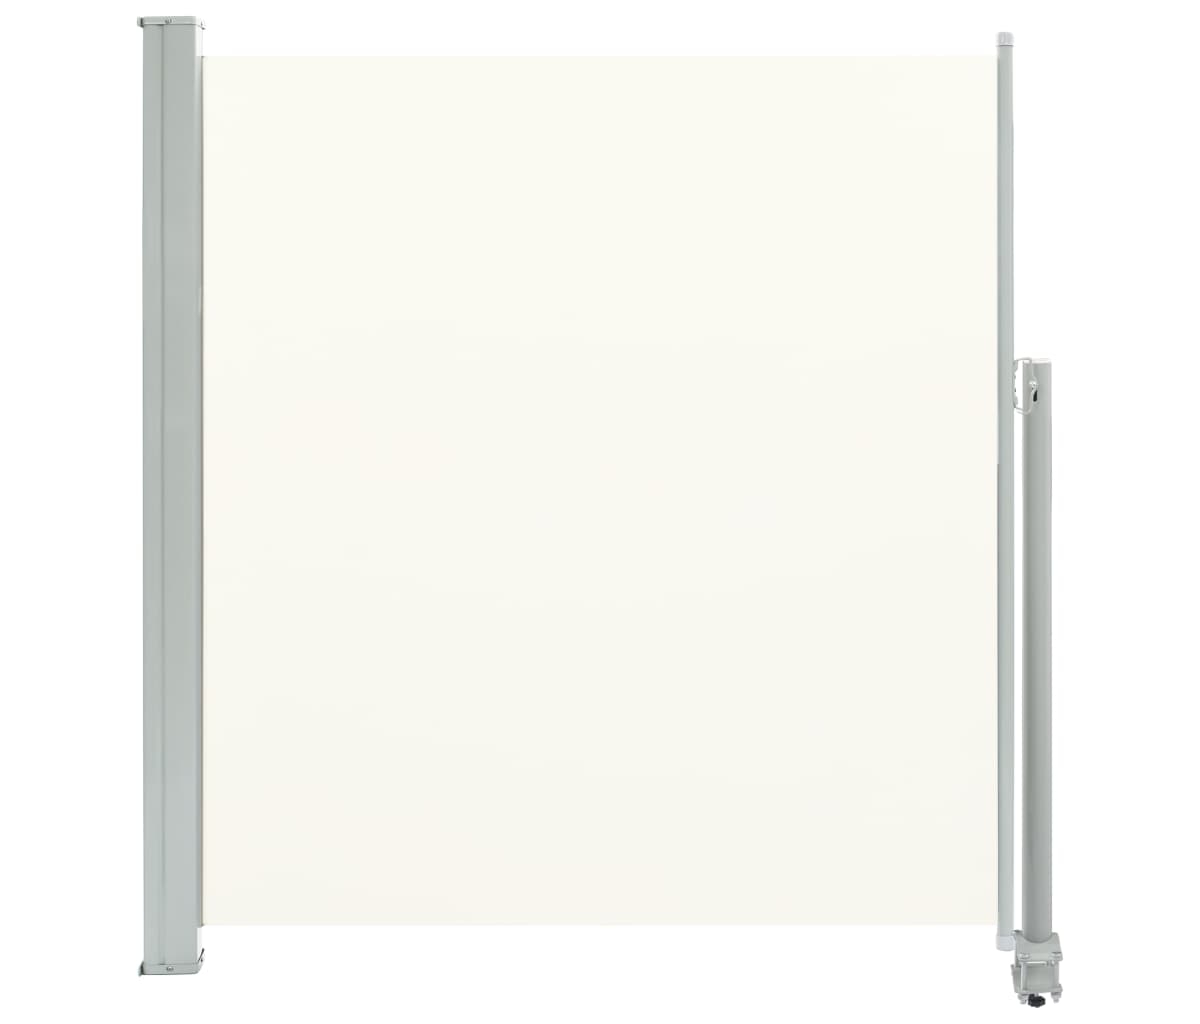 Patio Retractable Side Awning 55.1"x118.1" Cream - Light Beige